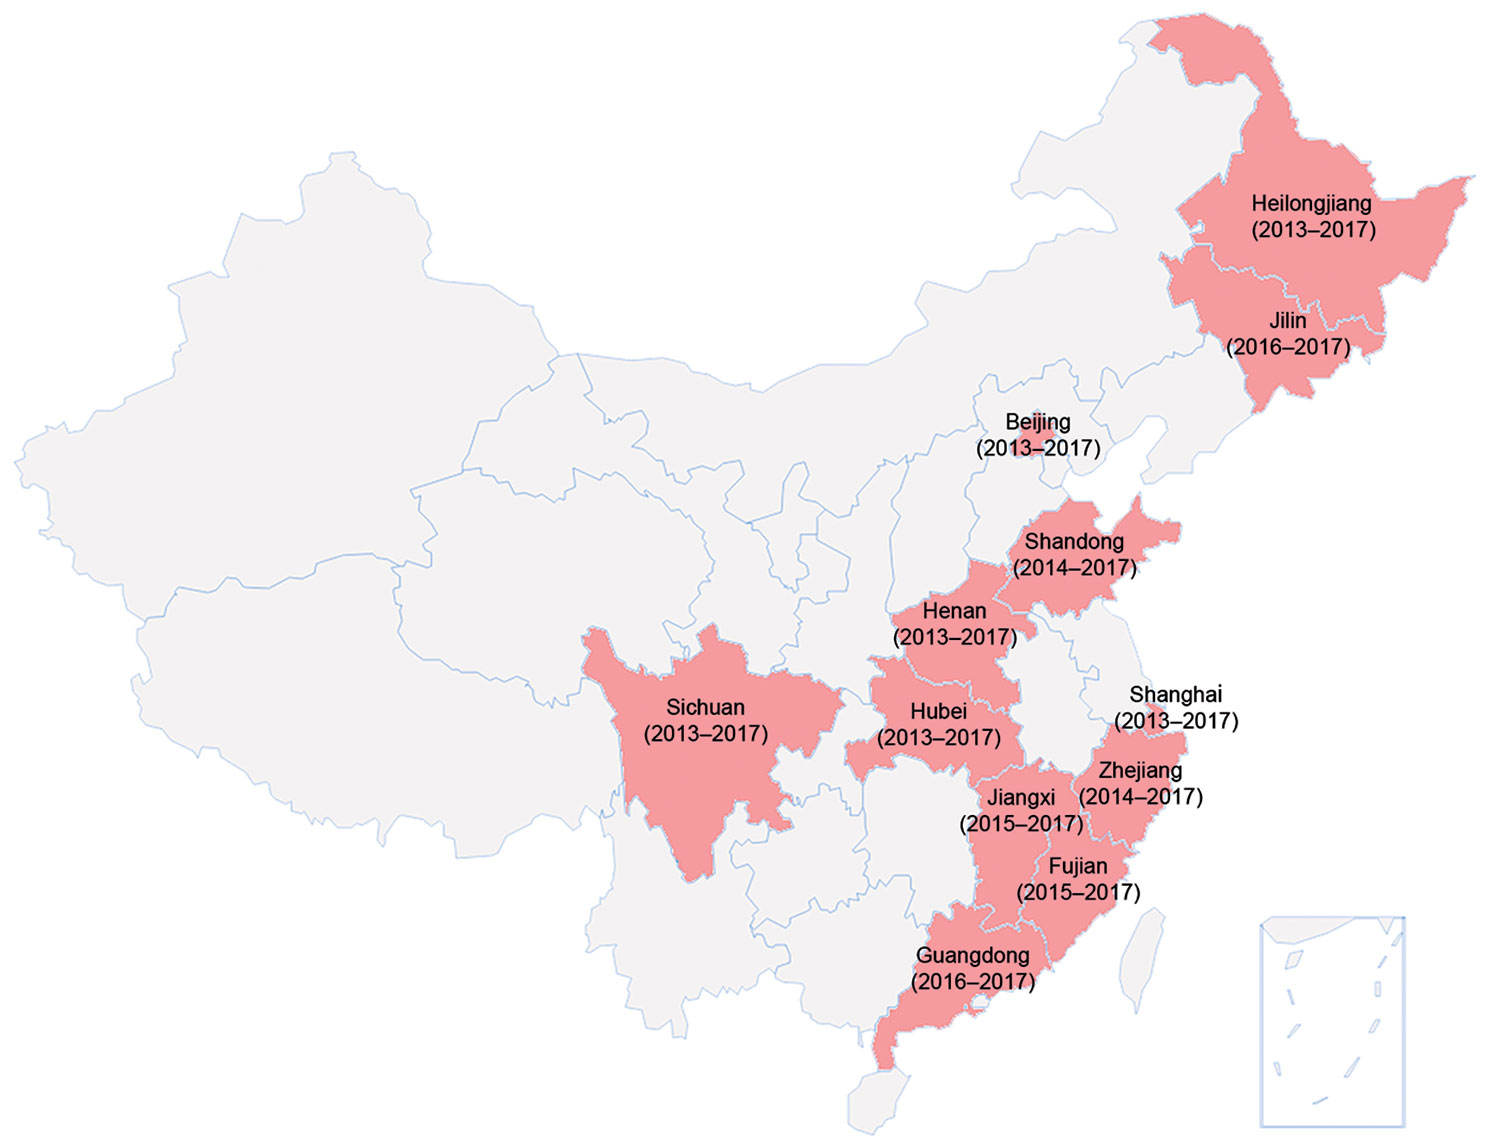 Geographic distribution of 12 selected provinces (red shading) included in human listeriosis surveillance, China, 2013–2017.